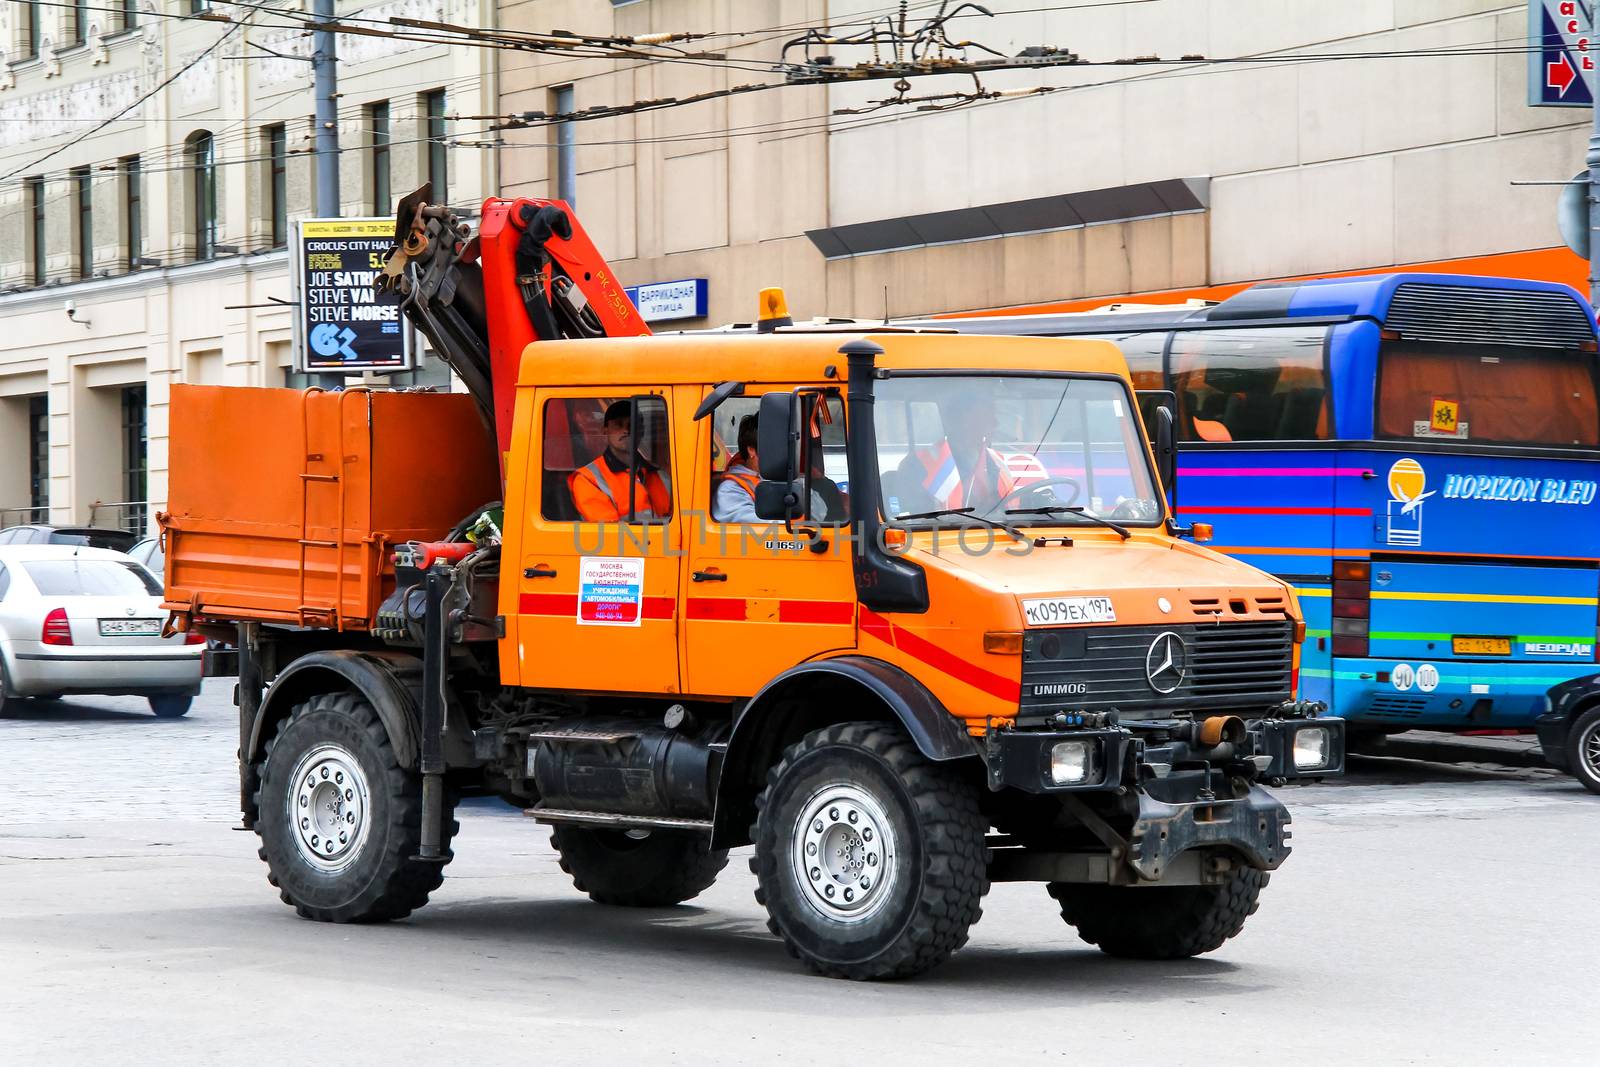 MOSCOW, RUSSIA - MAY 6, 2012: City service truck Unimog U1650 in the city street.